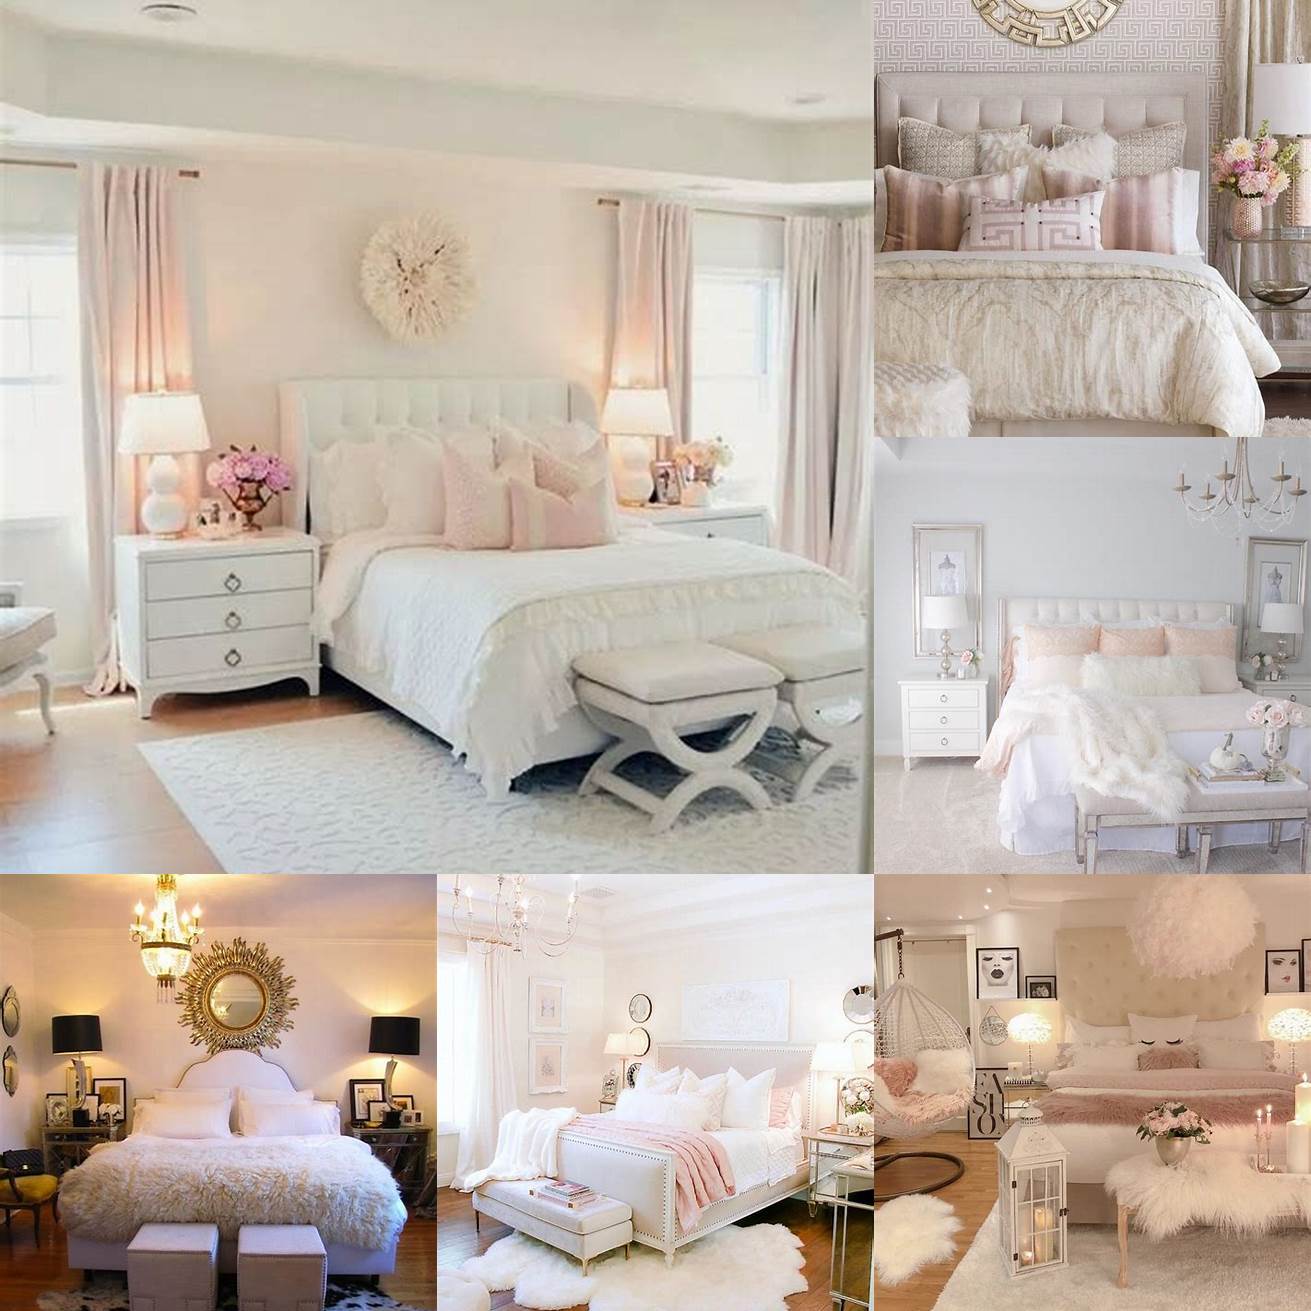 Image Idea White bedroom with furry accents and patterns